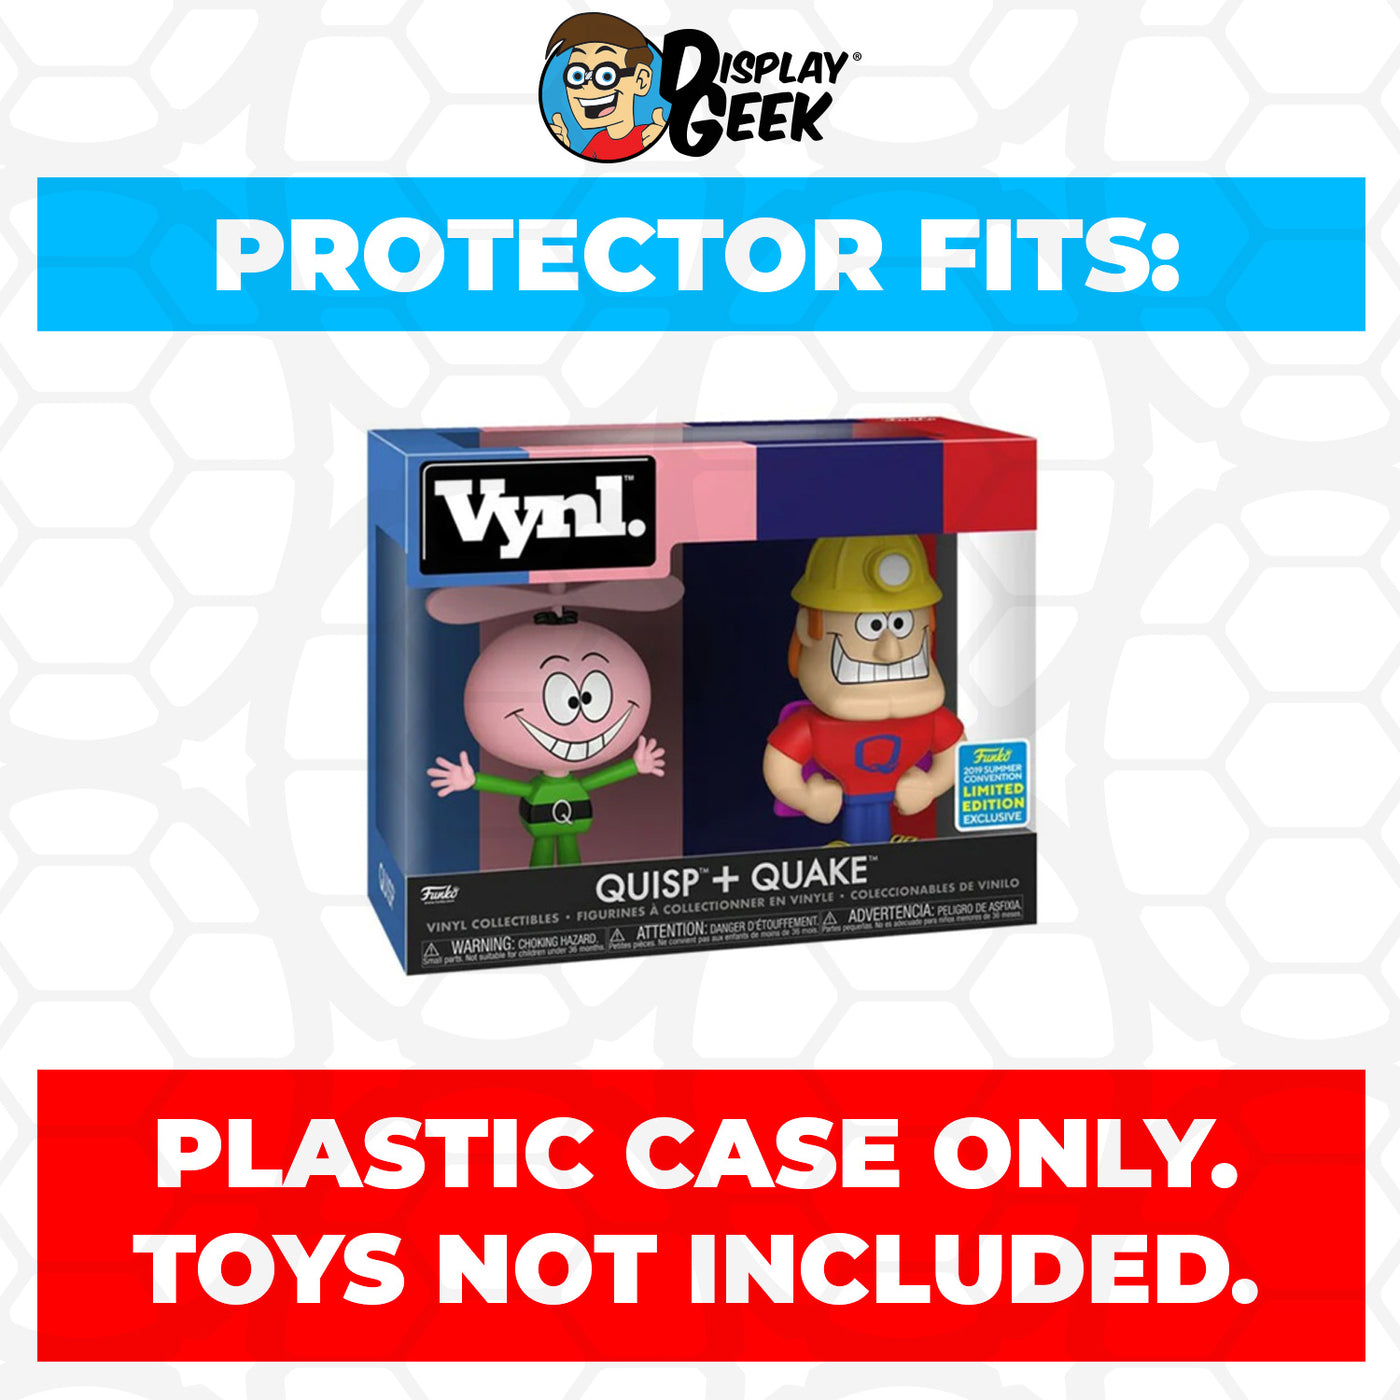 Pop Protector for Vynl 2 Pack Quisp & Quake SDCC Funko on The Protector Guide App by Display Geek